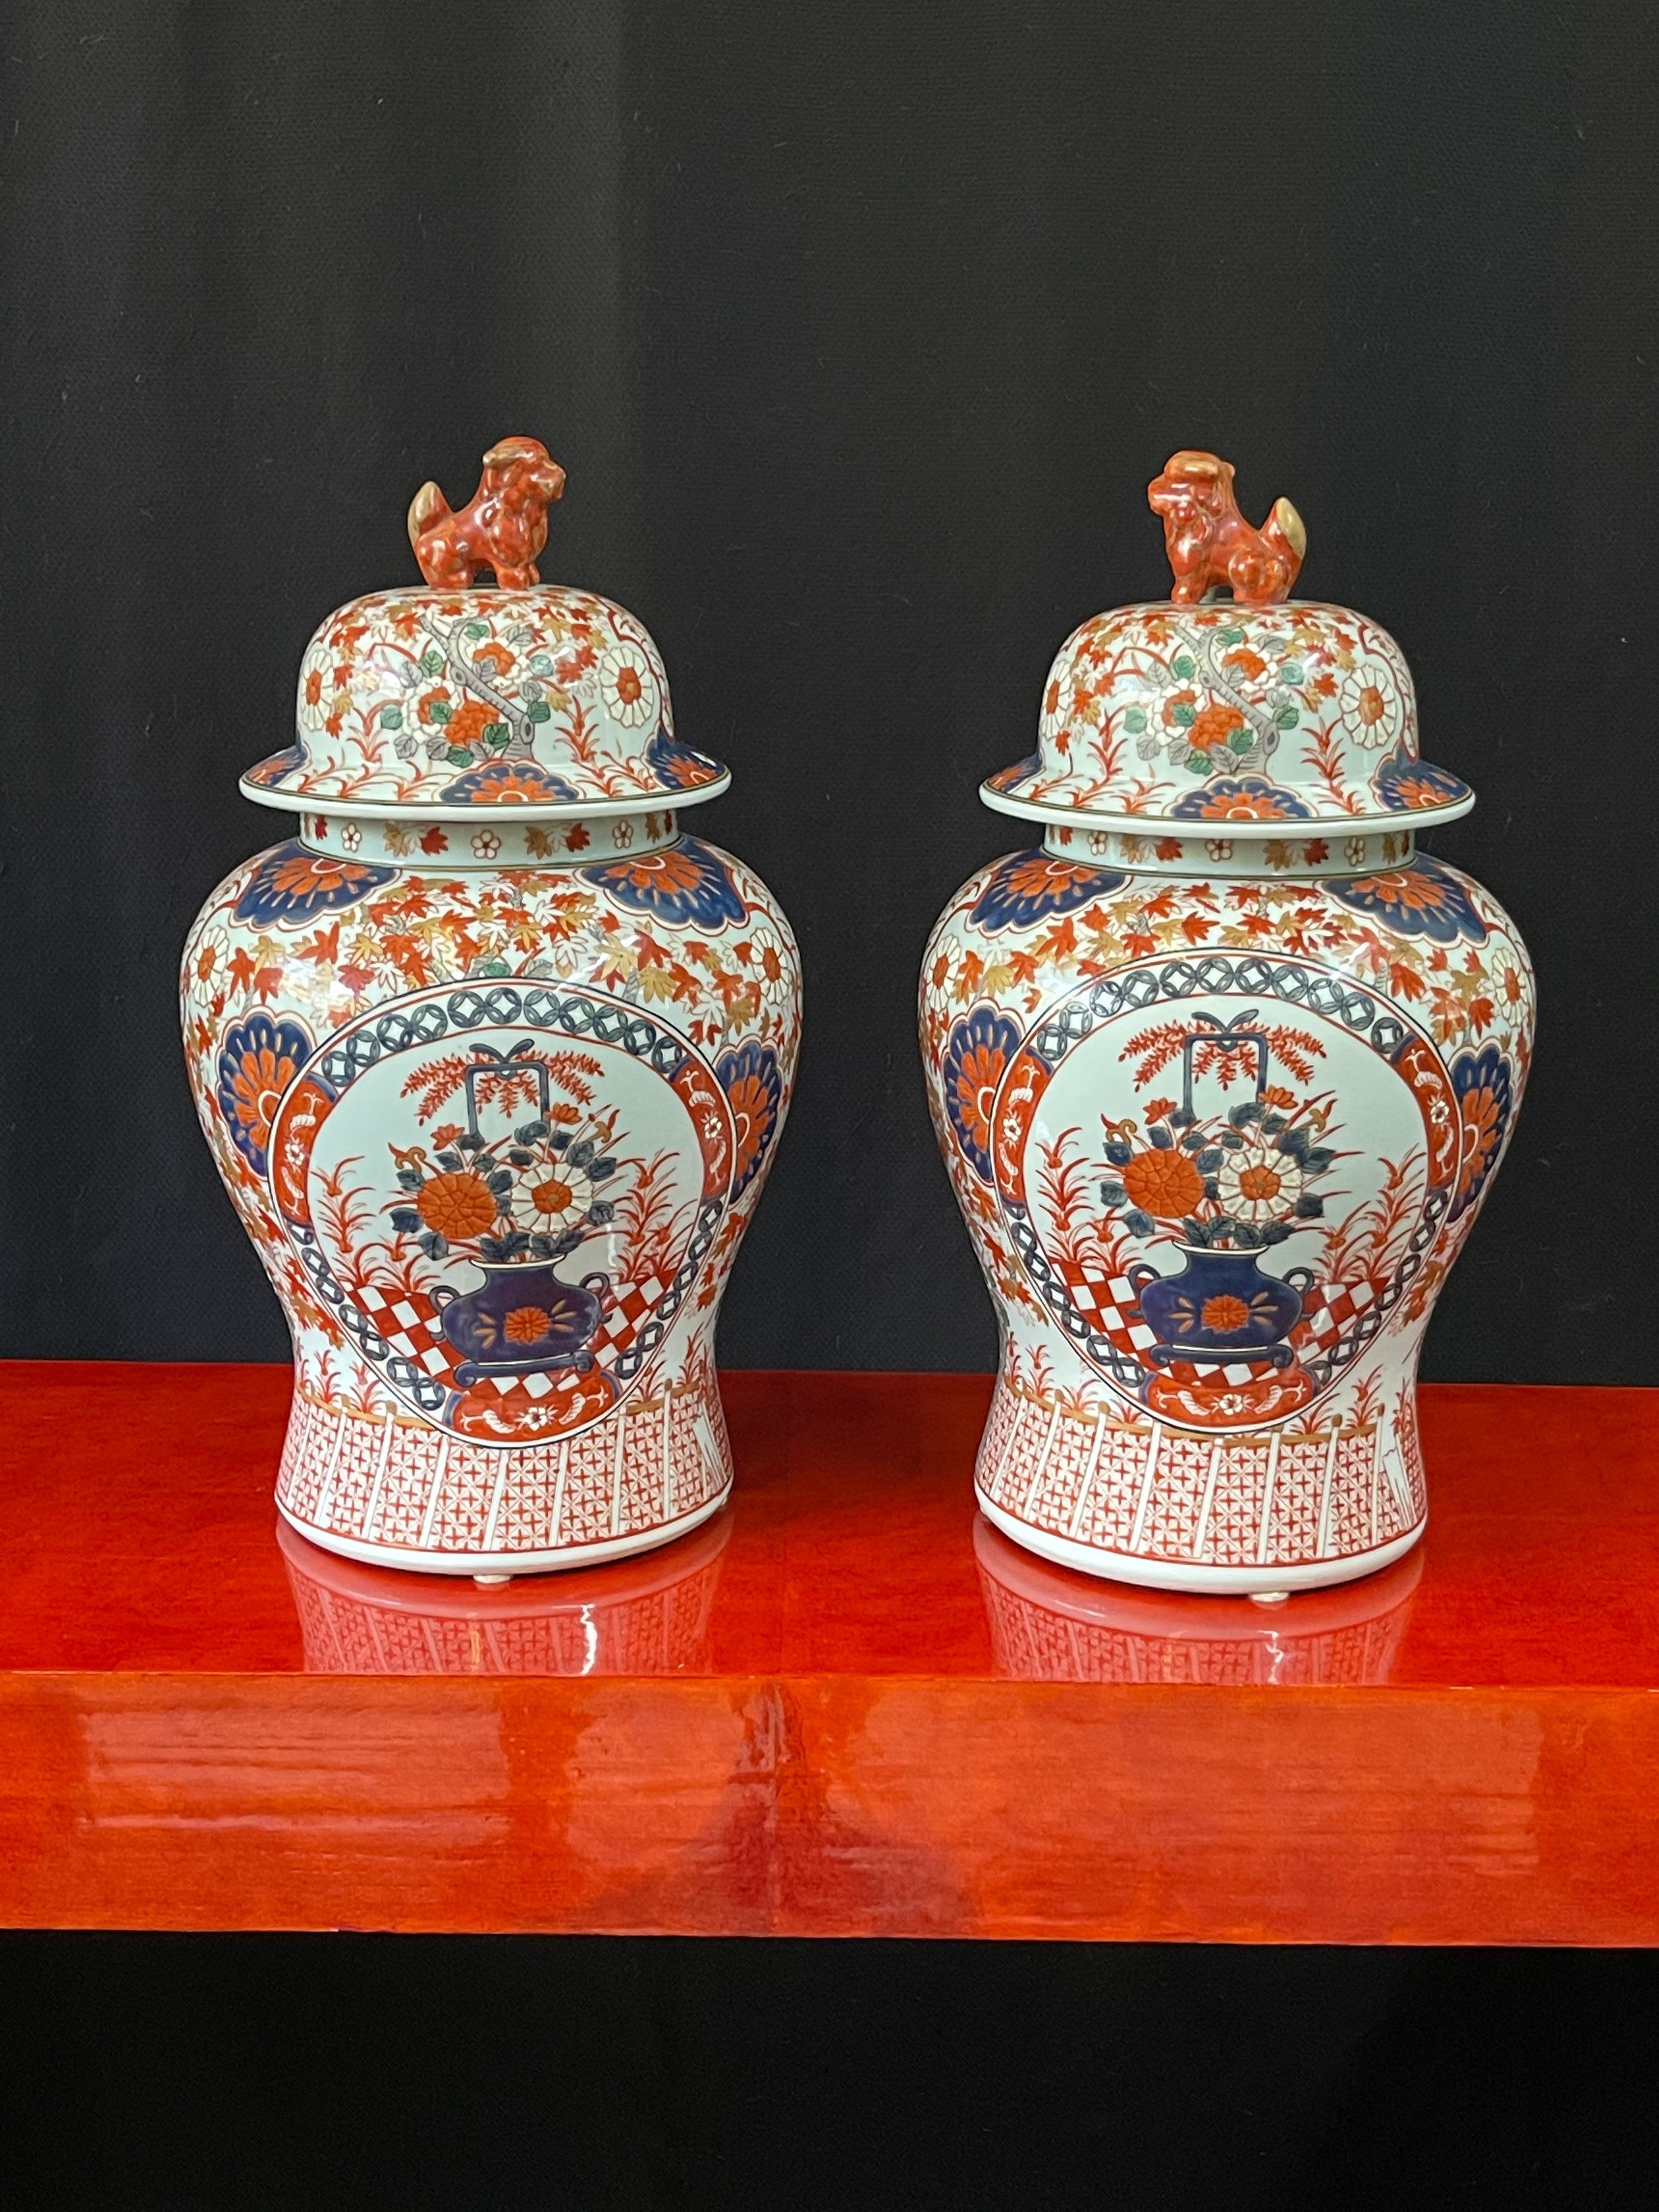 Exquisite pair of early 20th century Meiji Period Imari ginger jars with hand-painted designs on porcelain. The jars are decorated with a traditional Japanese Imari floral motif painted in enamels of intense iron red, red-orange, rich cobalt blue,